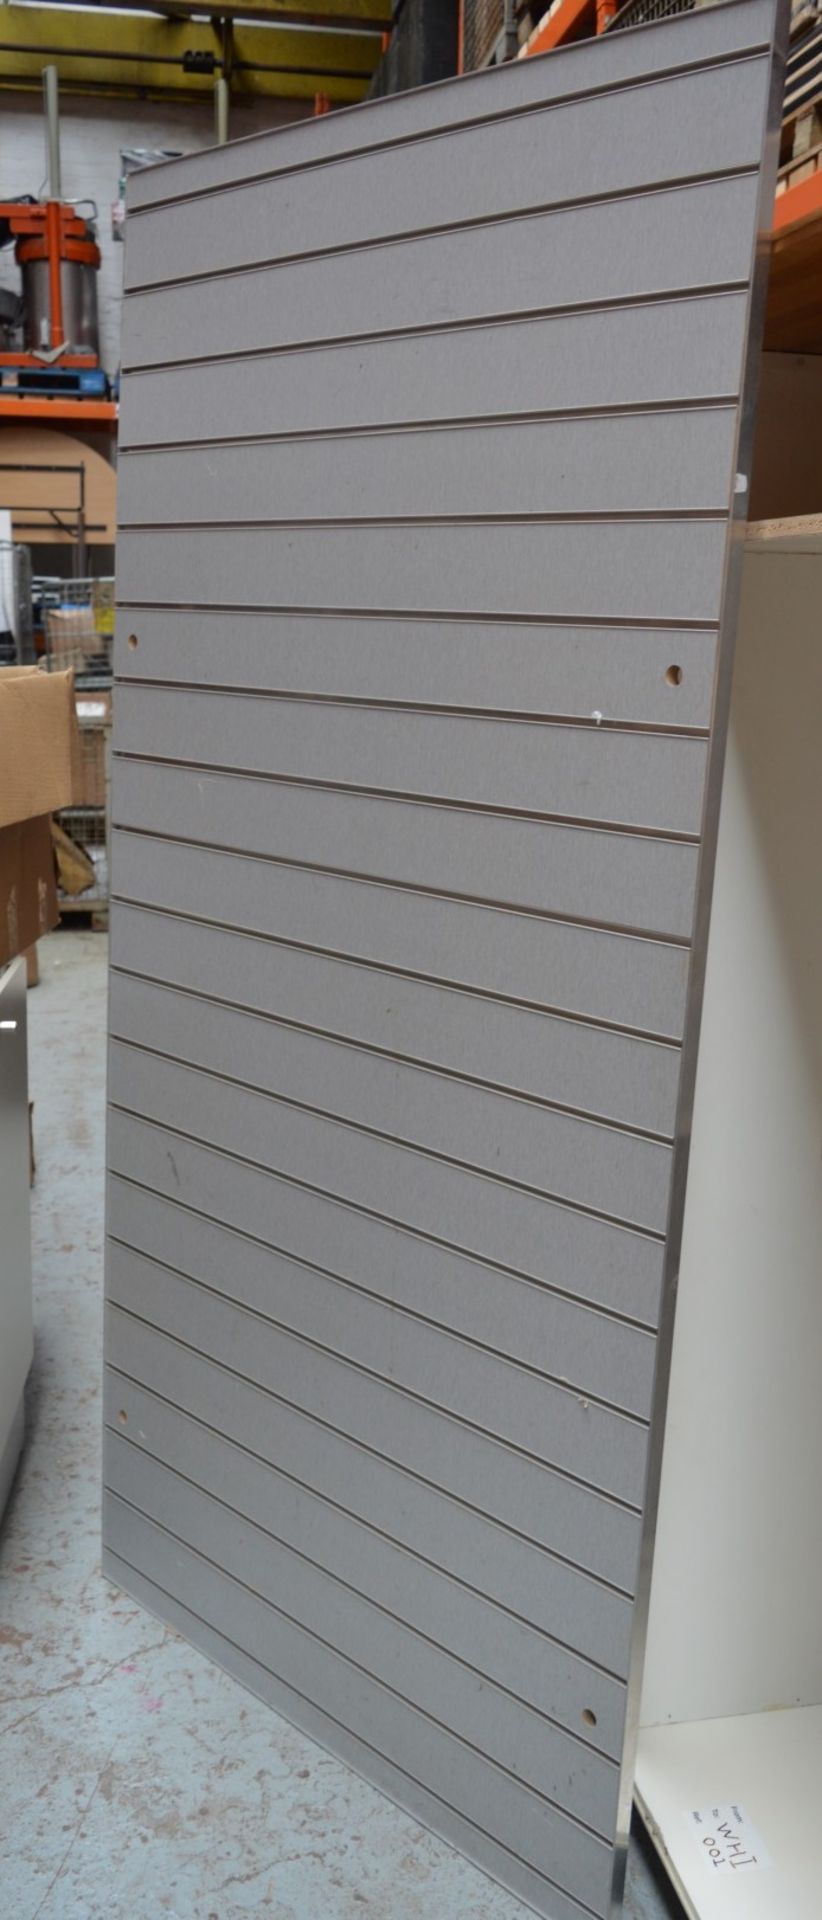 4 x Section of Retail Slat Wall With Large Selection of Slat Rails - Modern Grey Finish With - Image 2 of 4